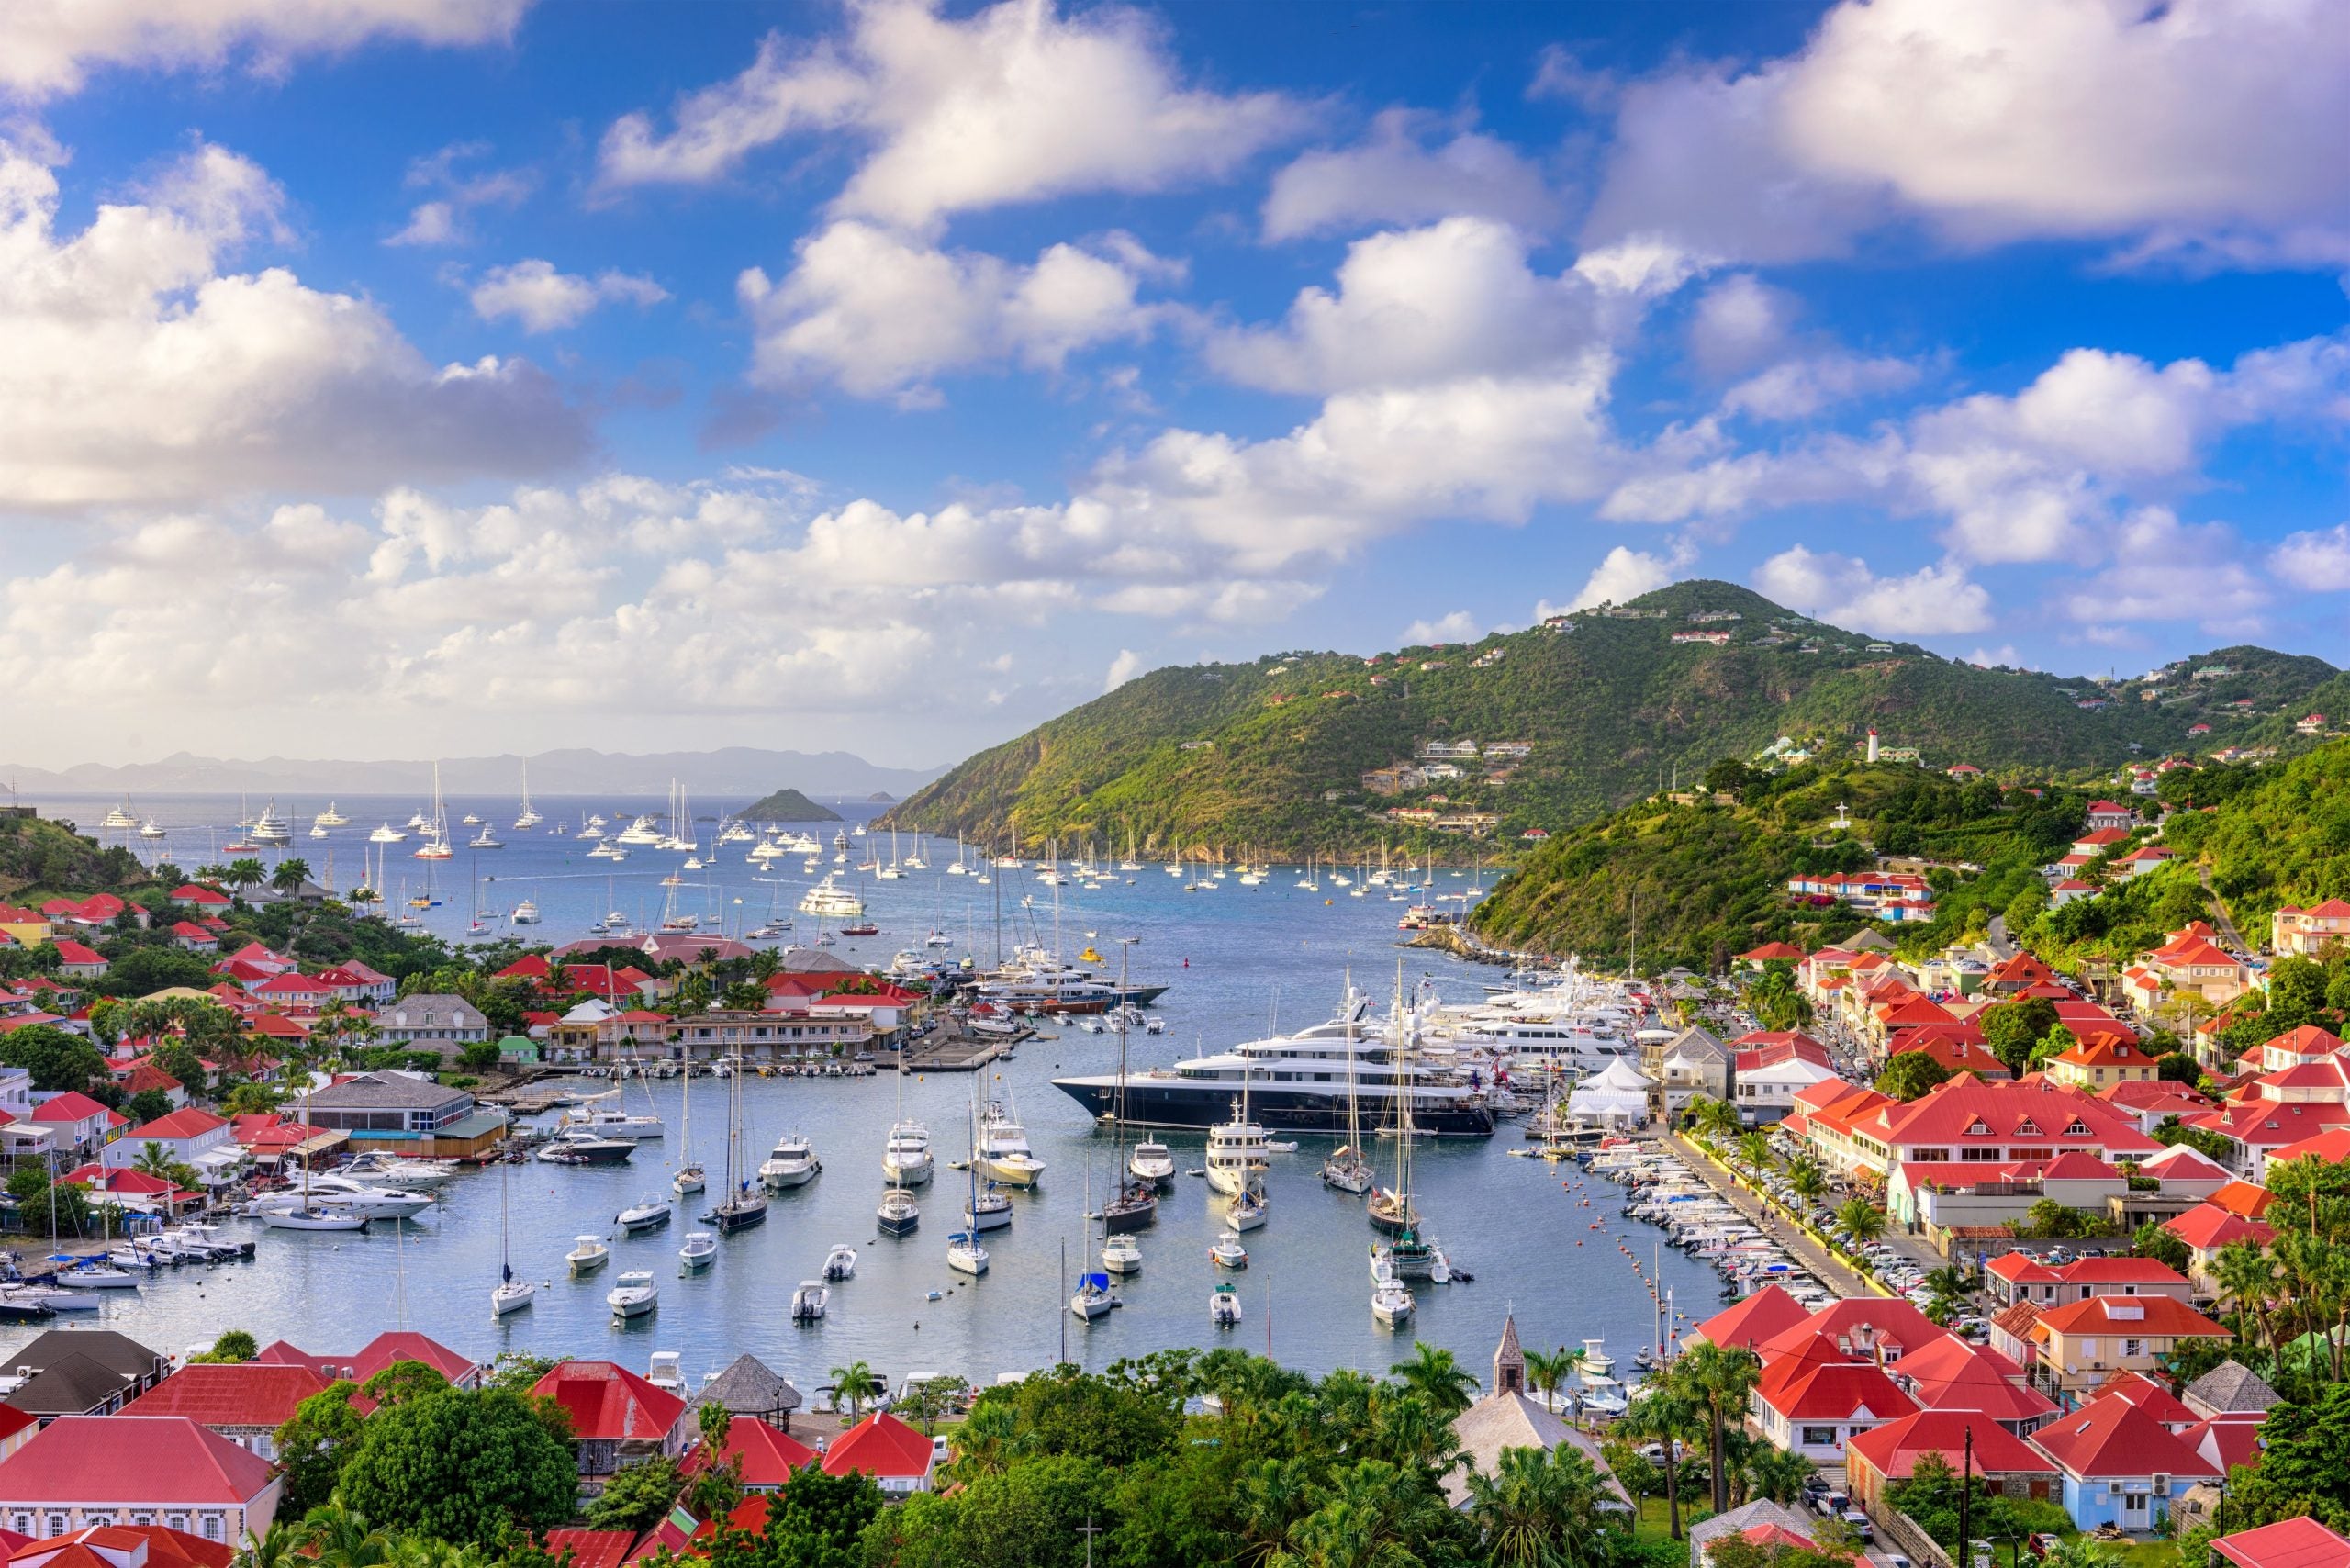 St Barts port with yachts charters